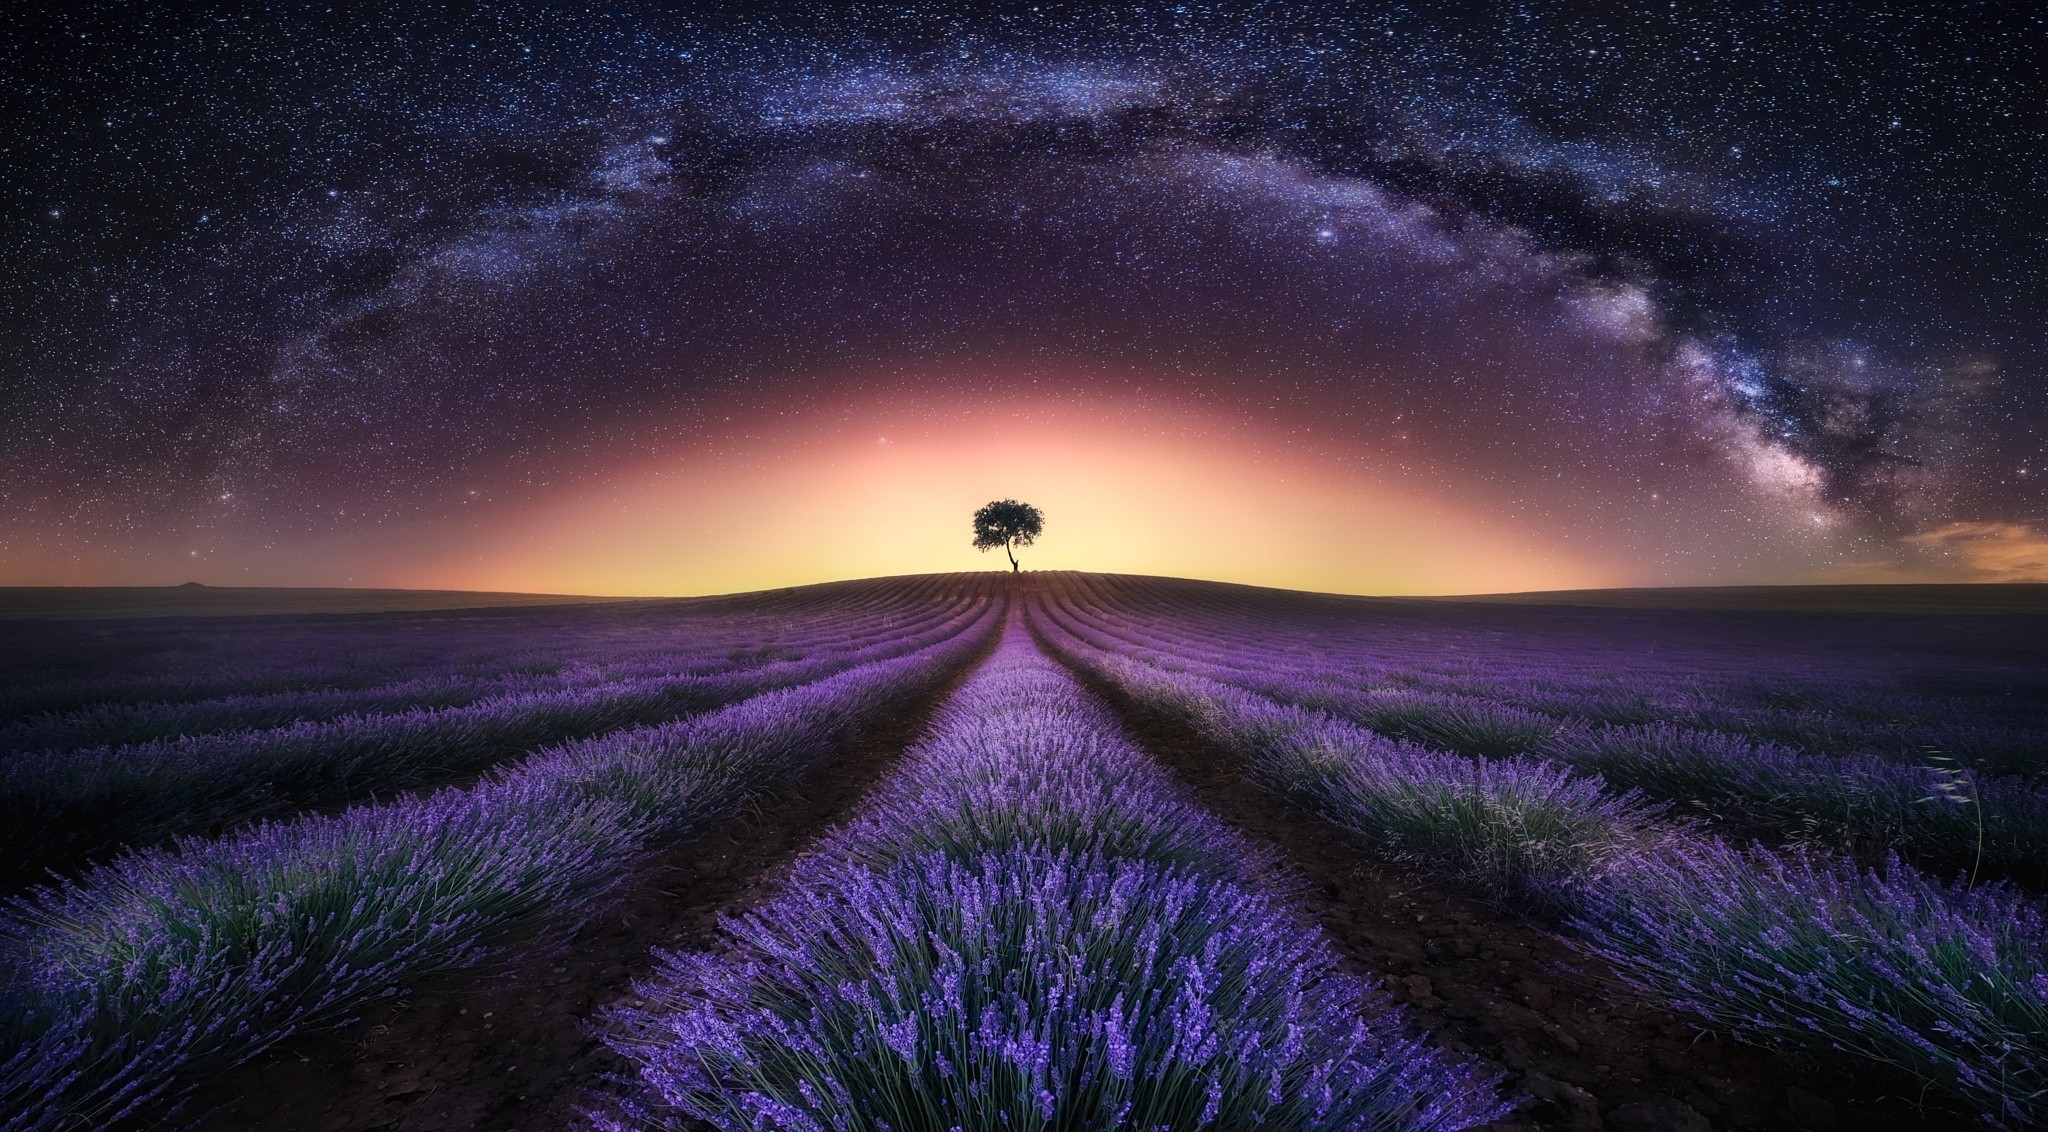 General 2048x1132 landscape stars nature long exposure trees lavender Milky Way field sky space plants Agro (Plants)